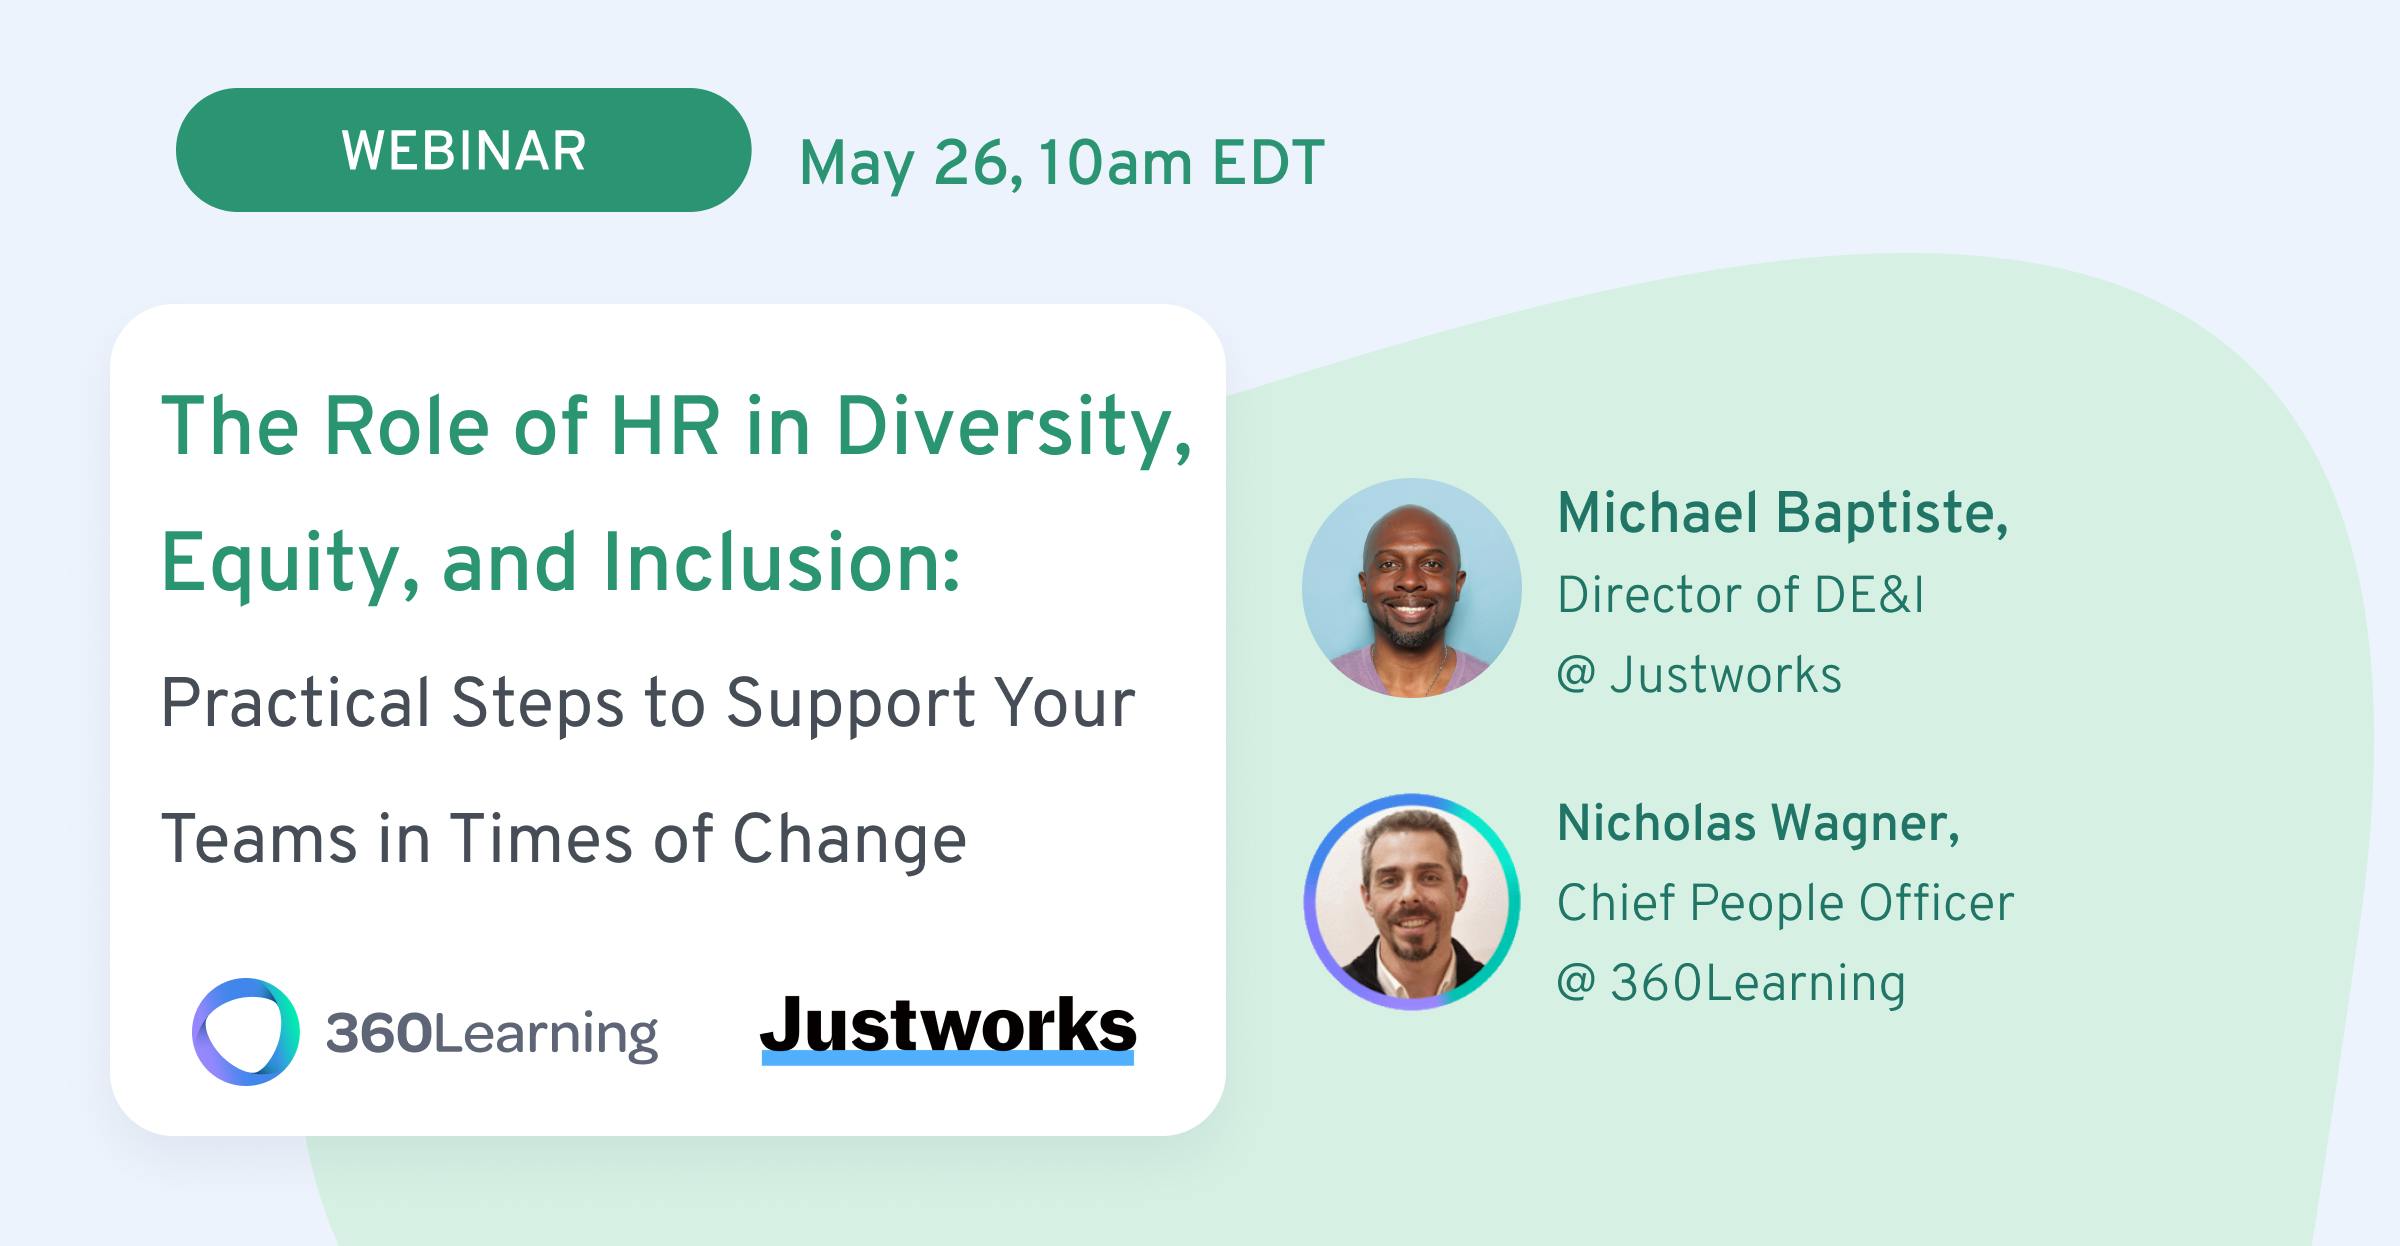 The role of HR in diversity, equity, and inclusion webinar CTA